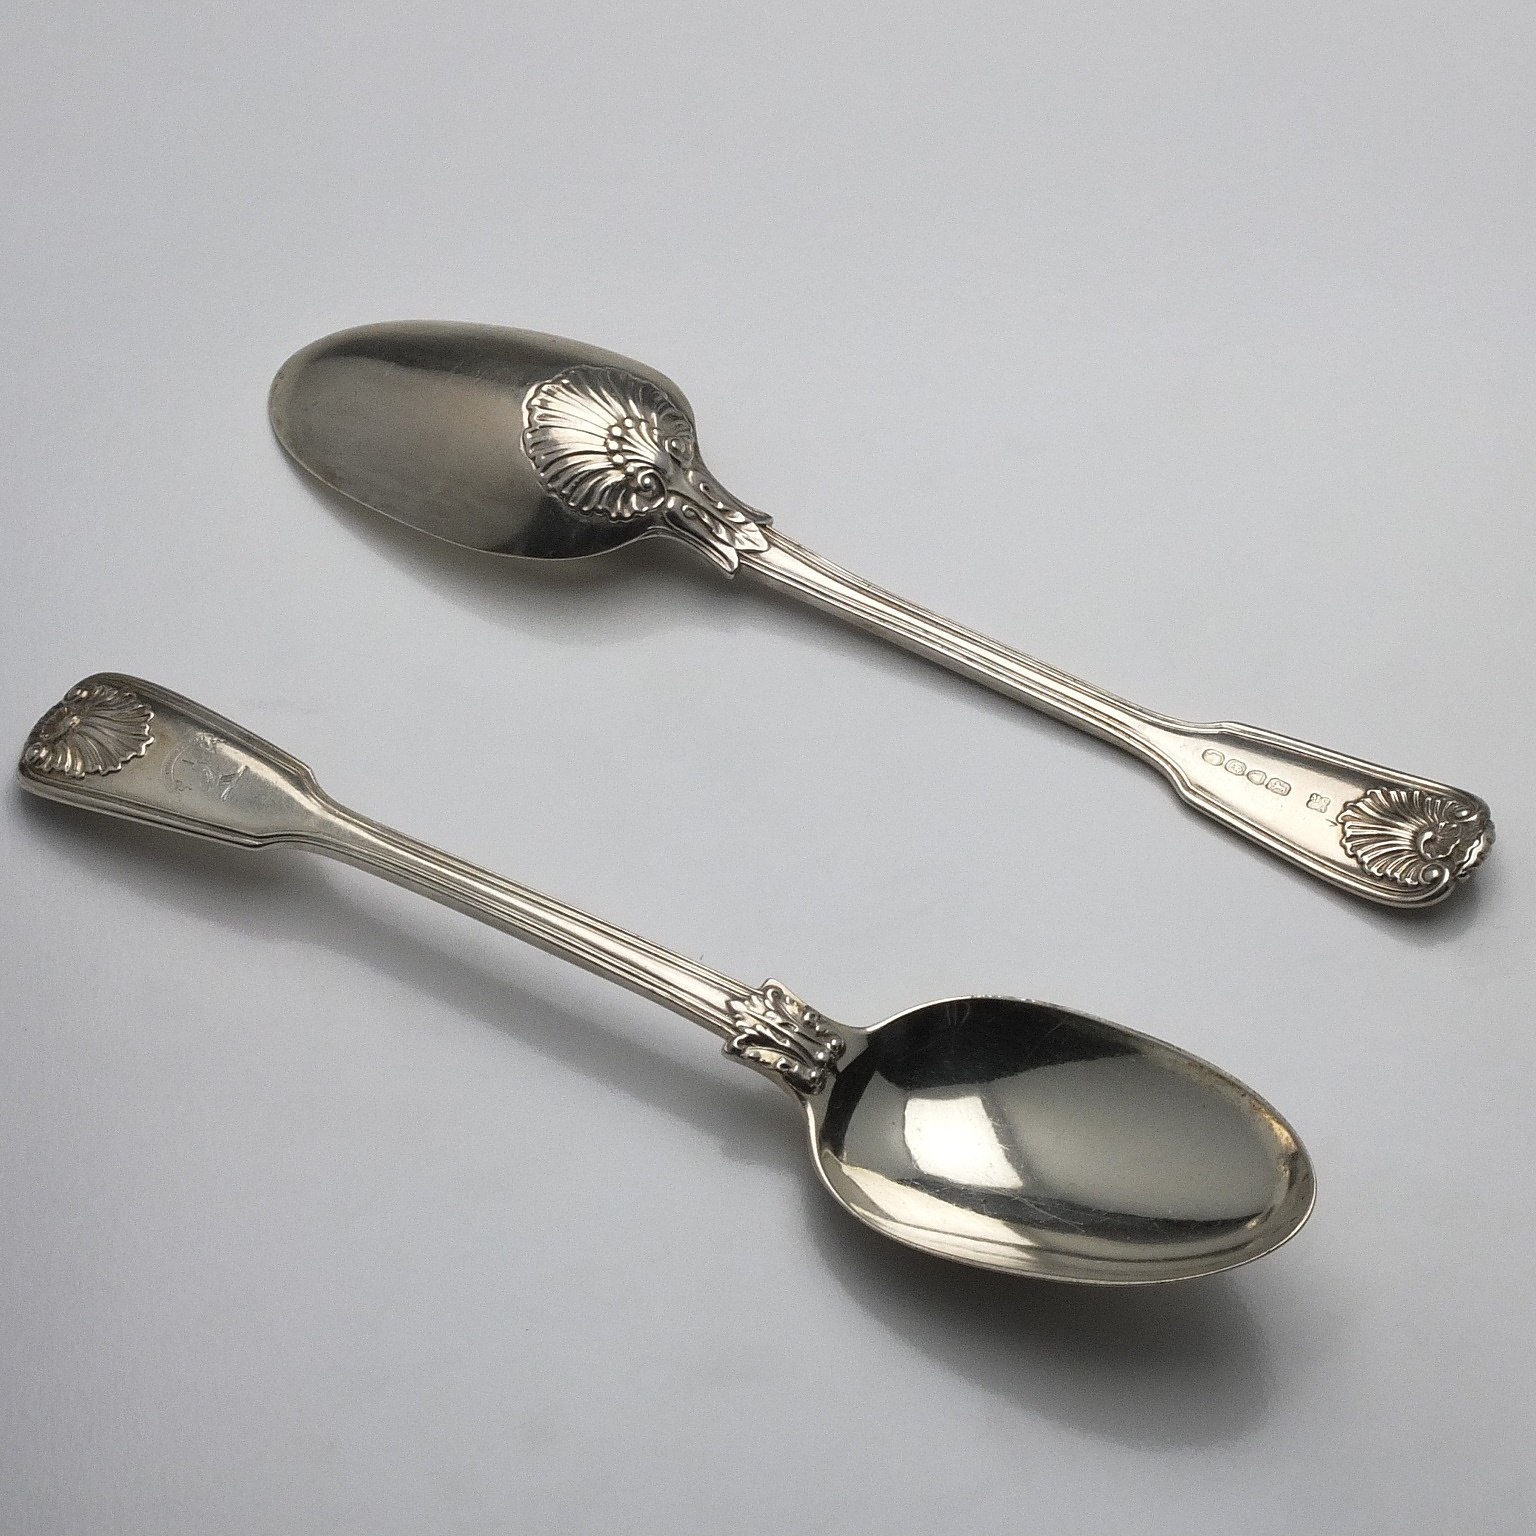 'Pair of Victorian Crested Sterling Silver Table Spoons Mary Chawner & George W Adams London 1838'